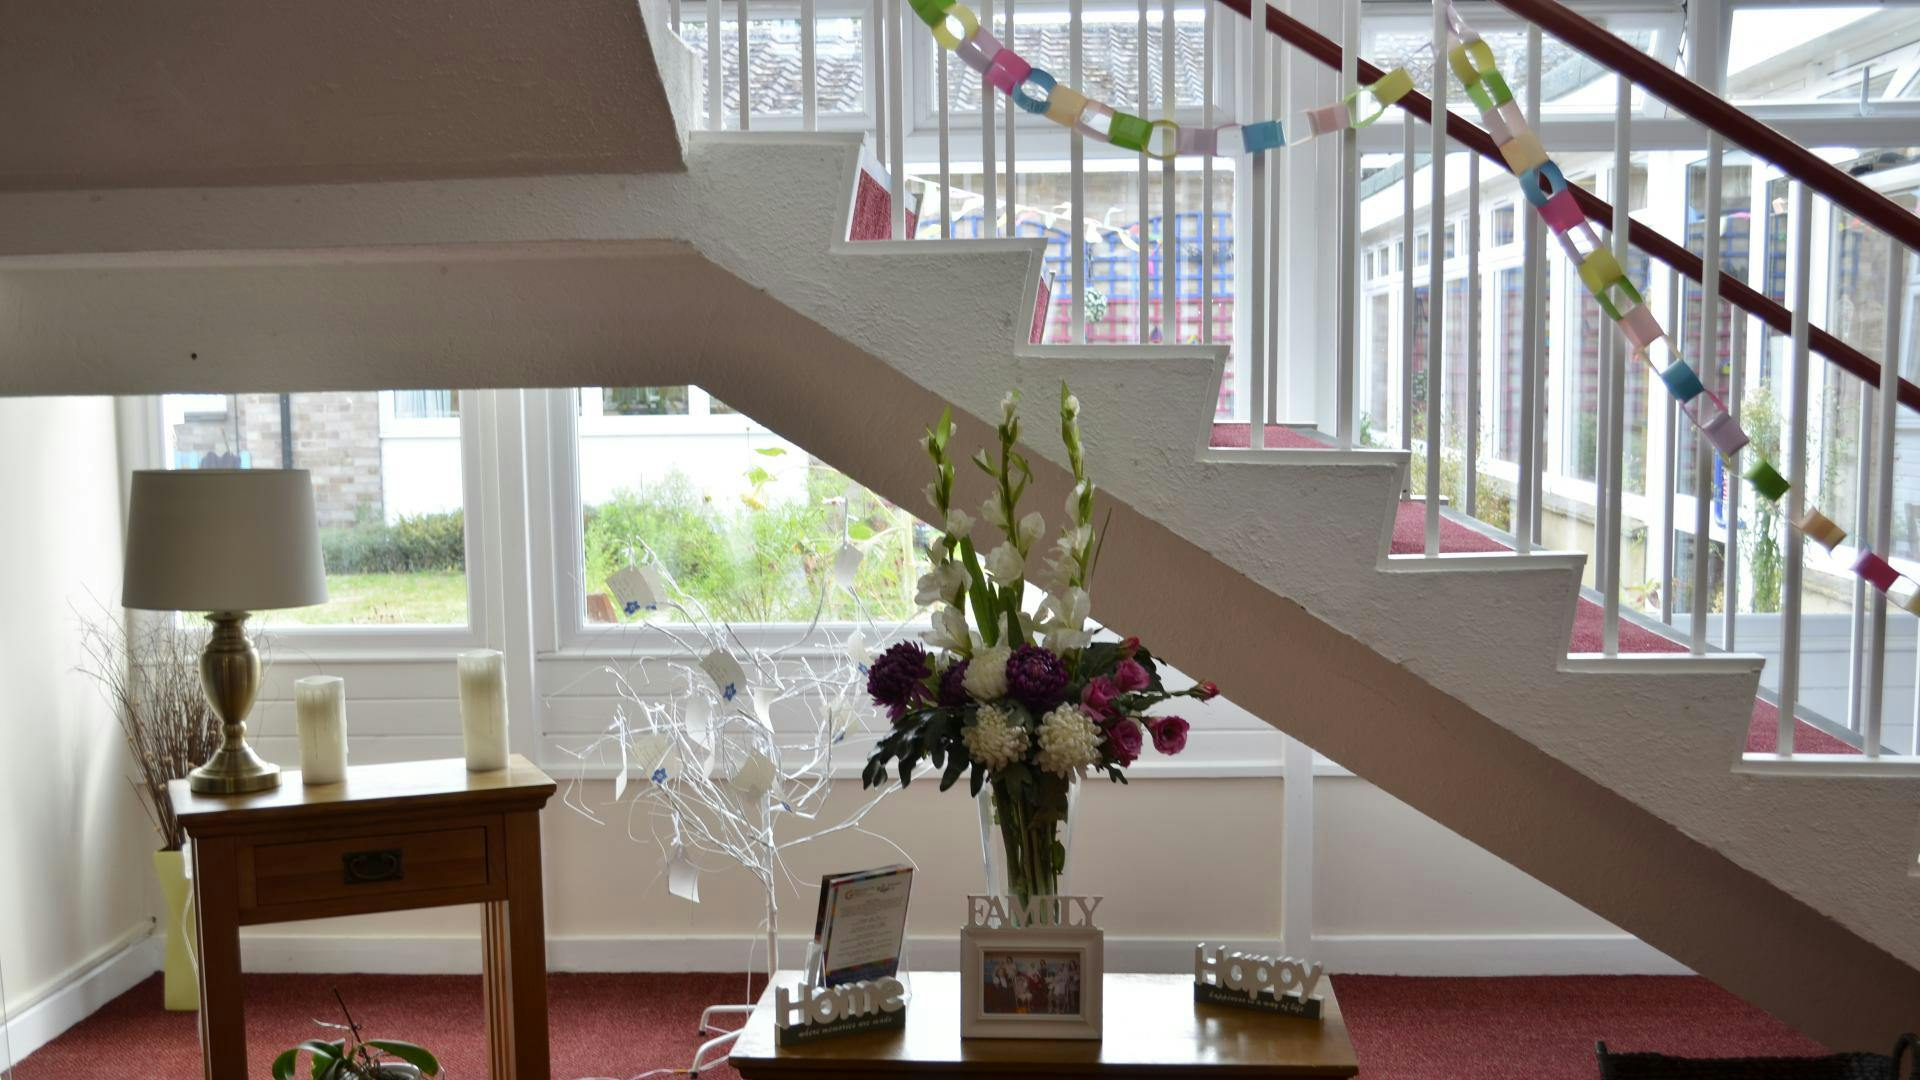 Reception at Longlands Care Home in Oxford, Oxfordshire